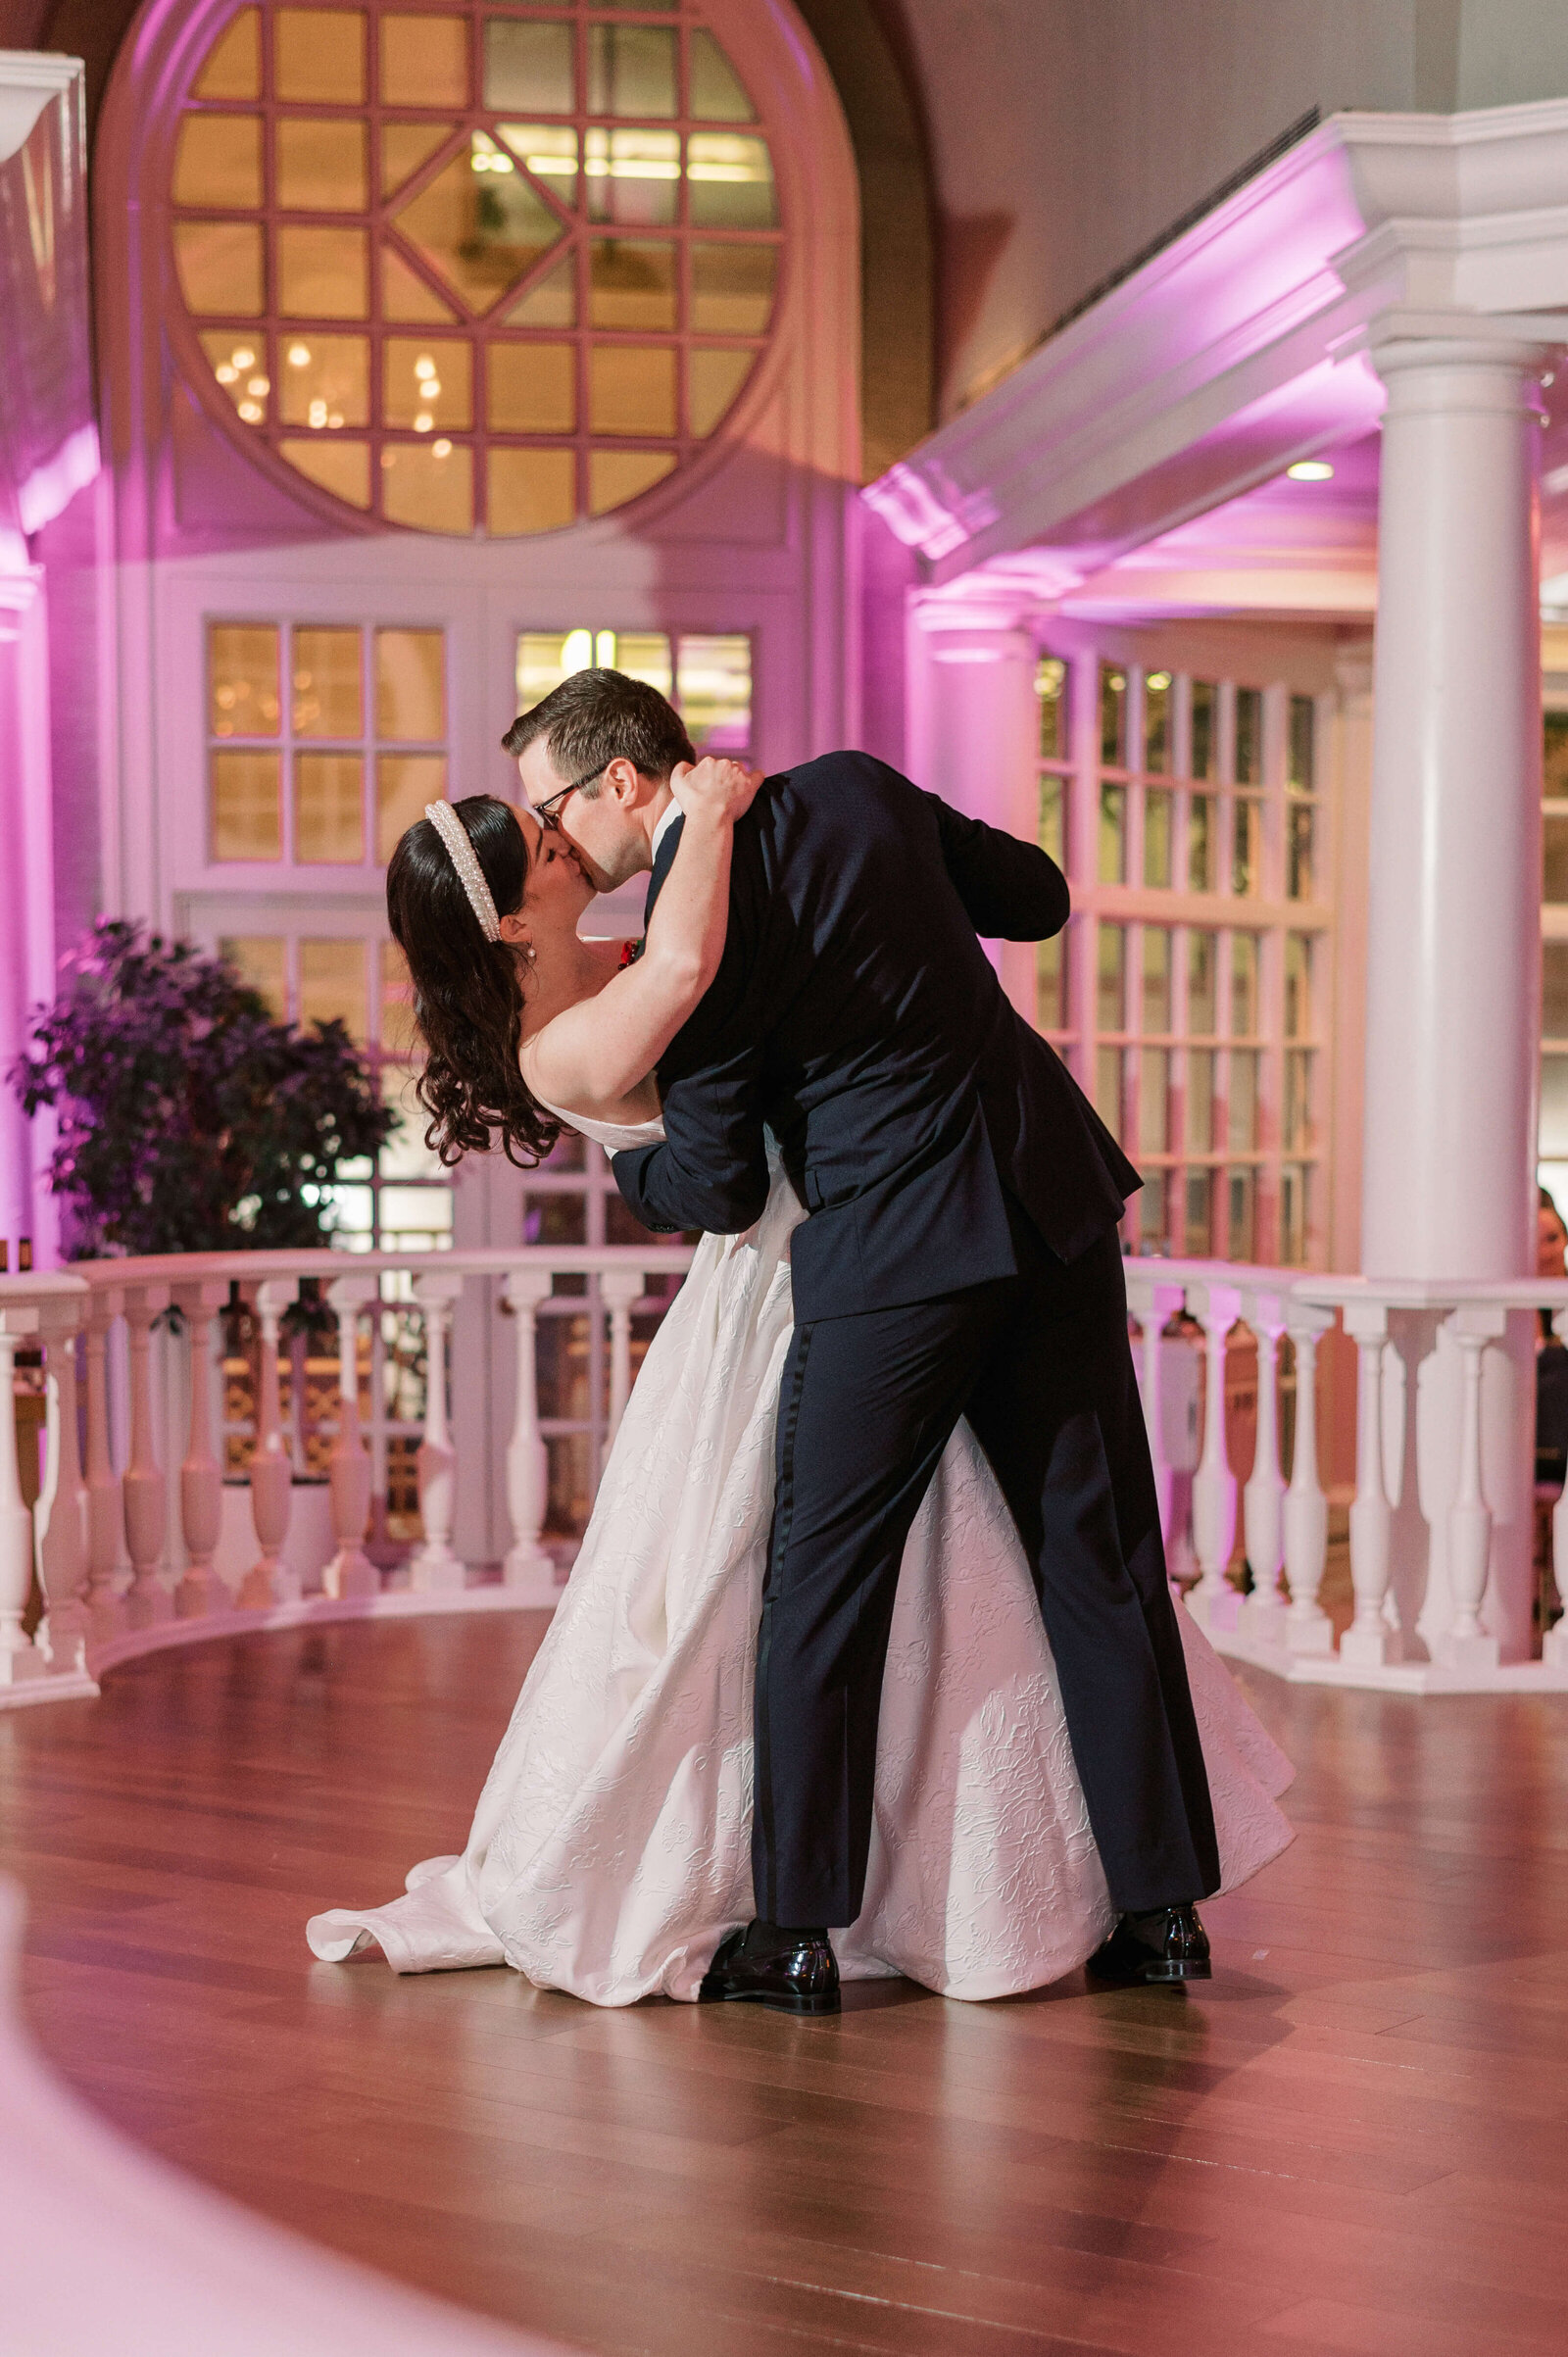 Purple up lighting frames the bride and groom during their first dance while the groom dips and kisses the bride